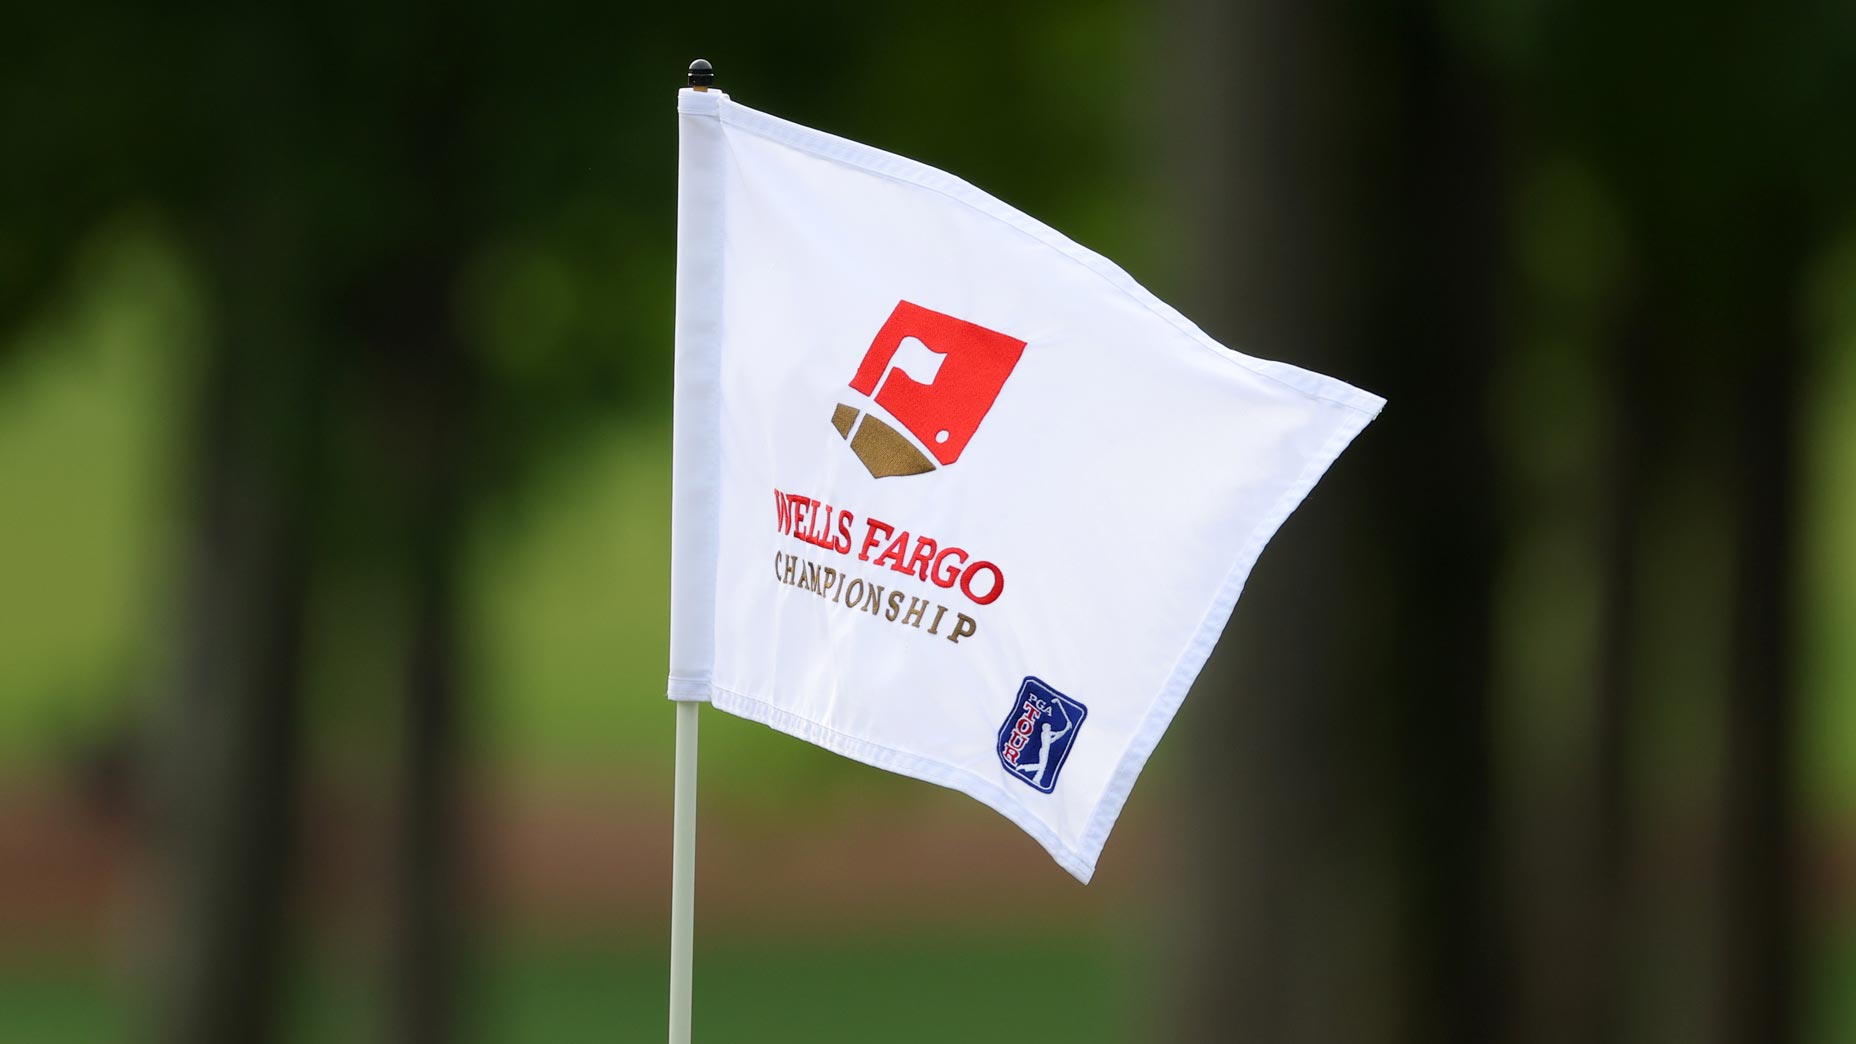 A Wells Fargo Championship pin flag flaps in the wind at Quail Hollow